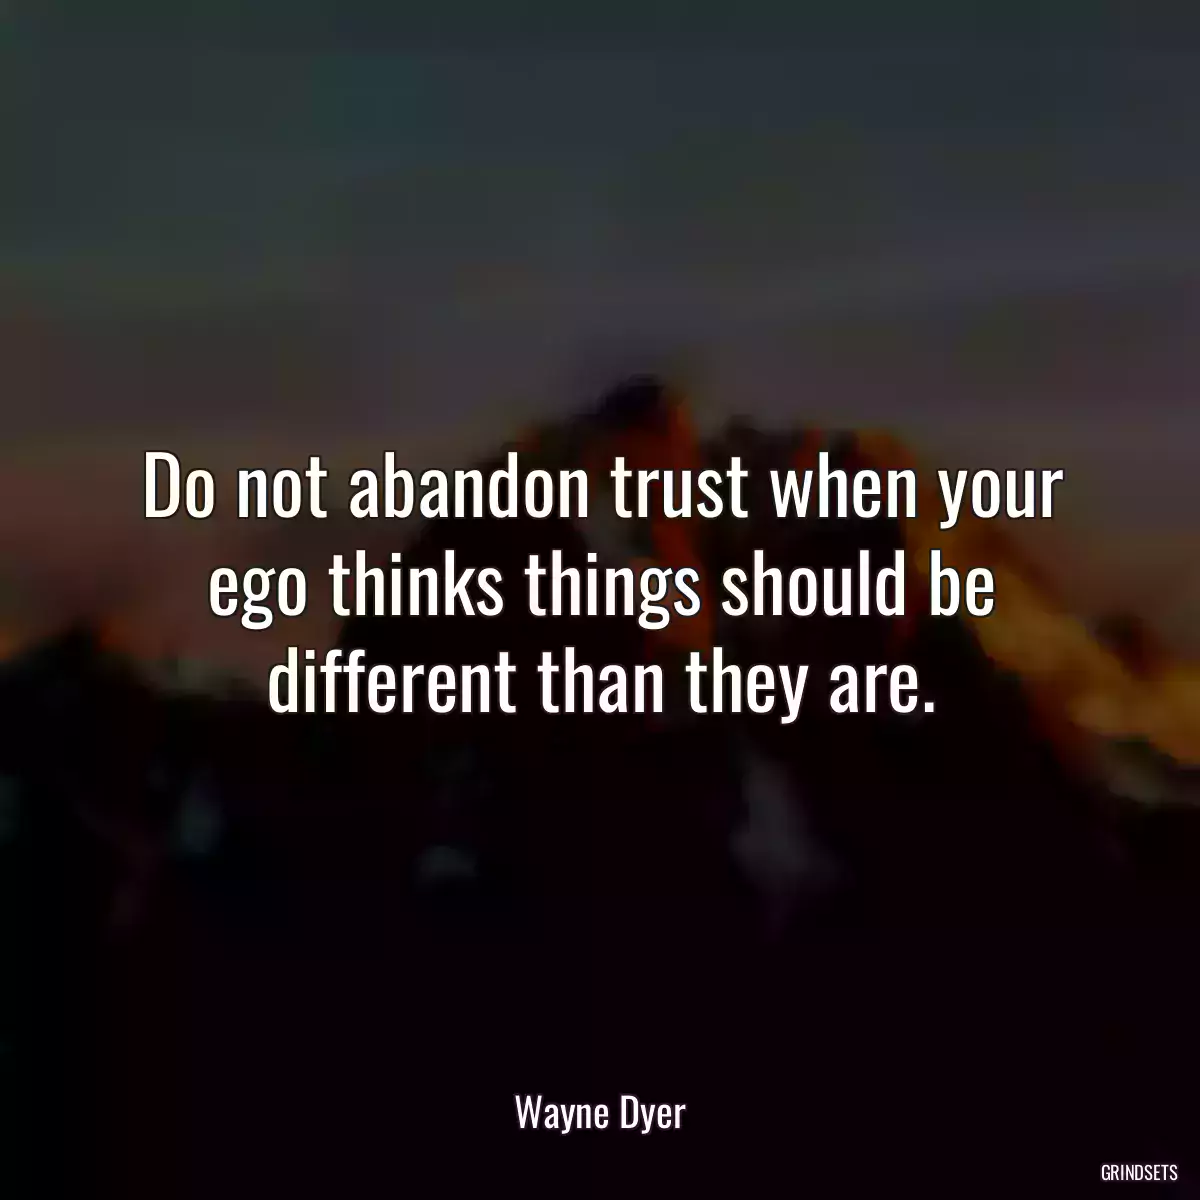 Do not abandon trust when your ego thinks things should be different than they are.